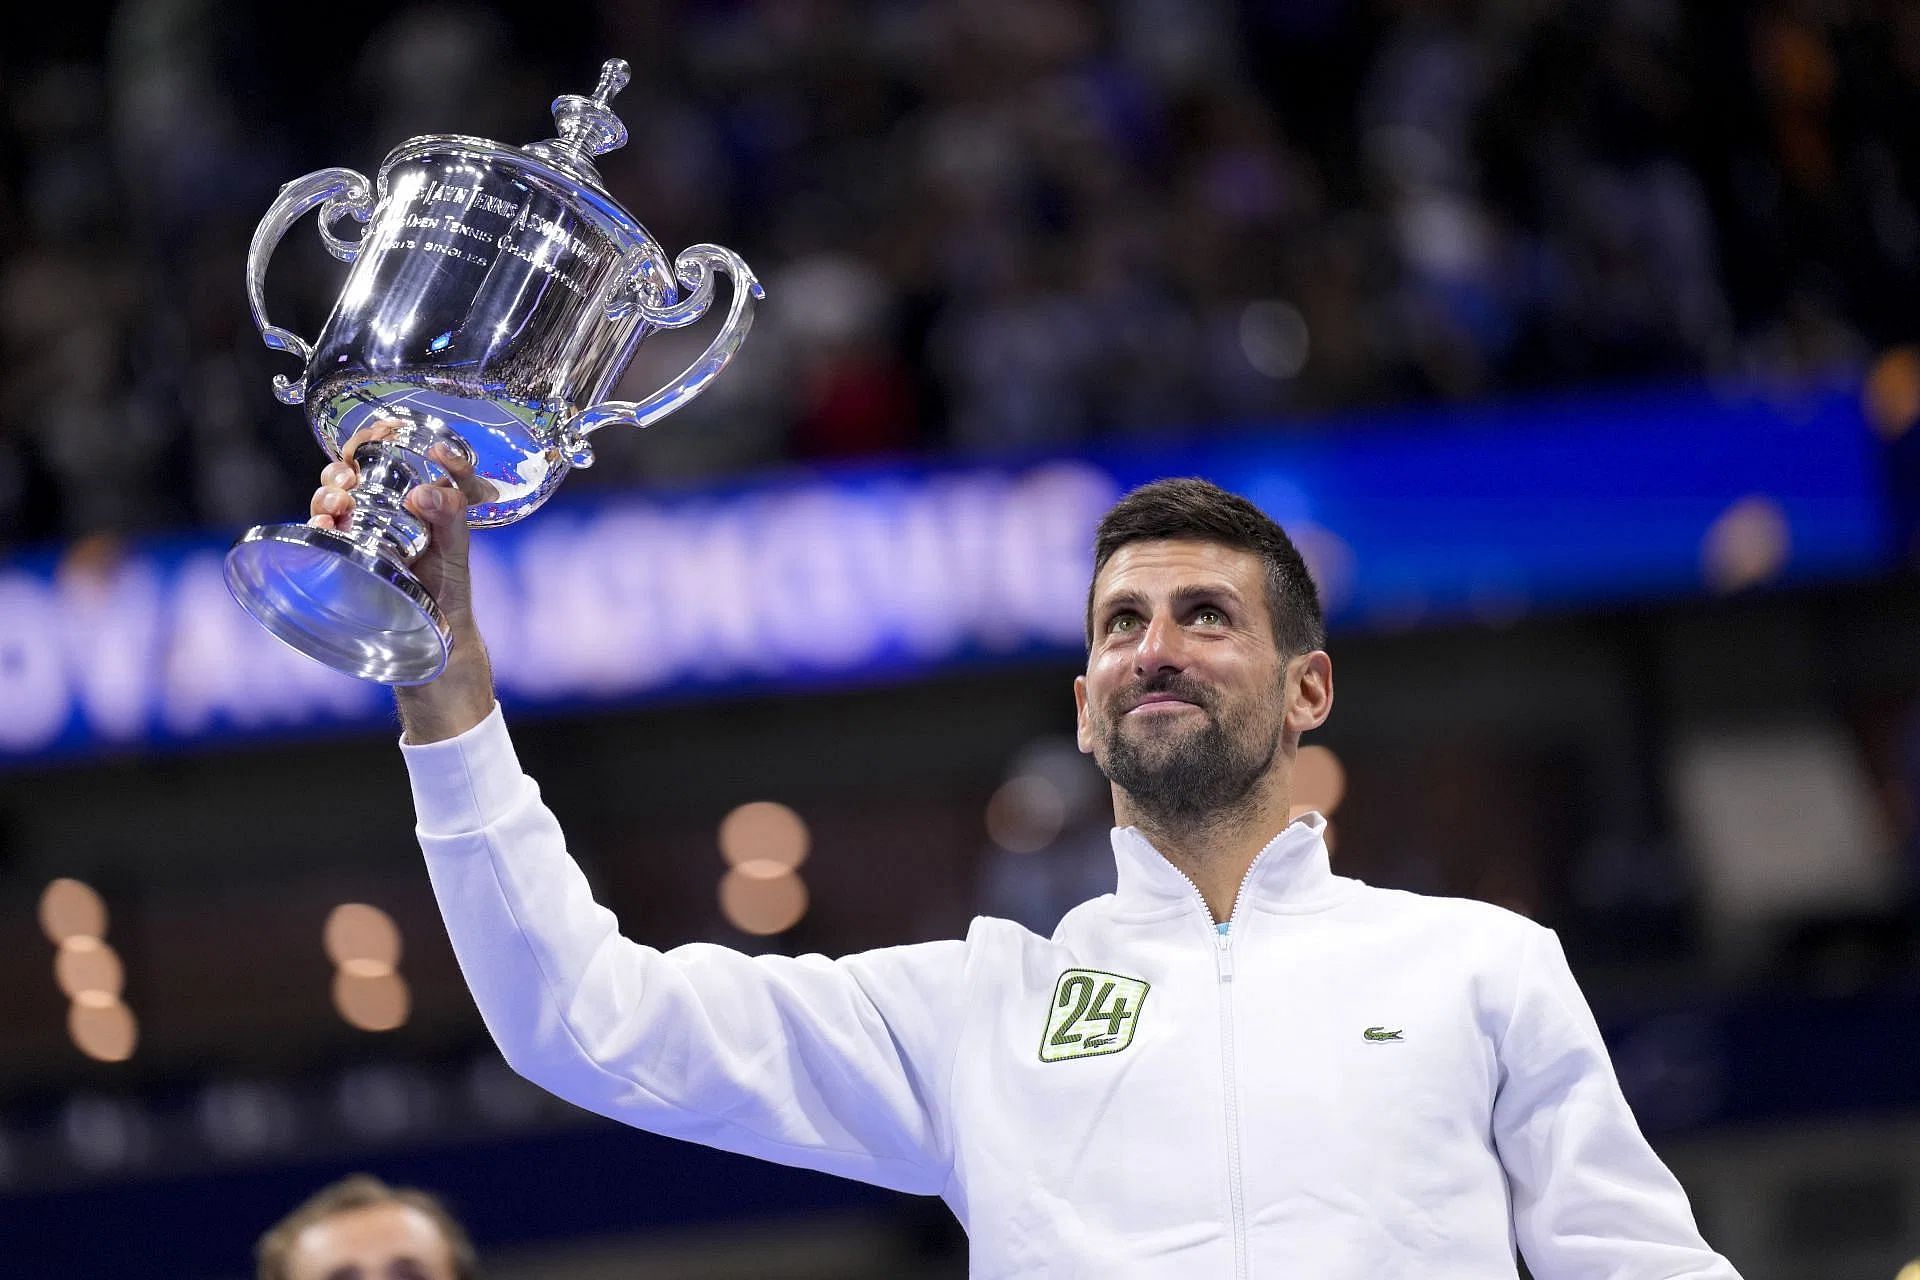 The Serb lifts the US Open trophy.